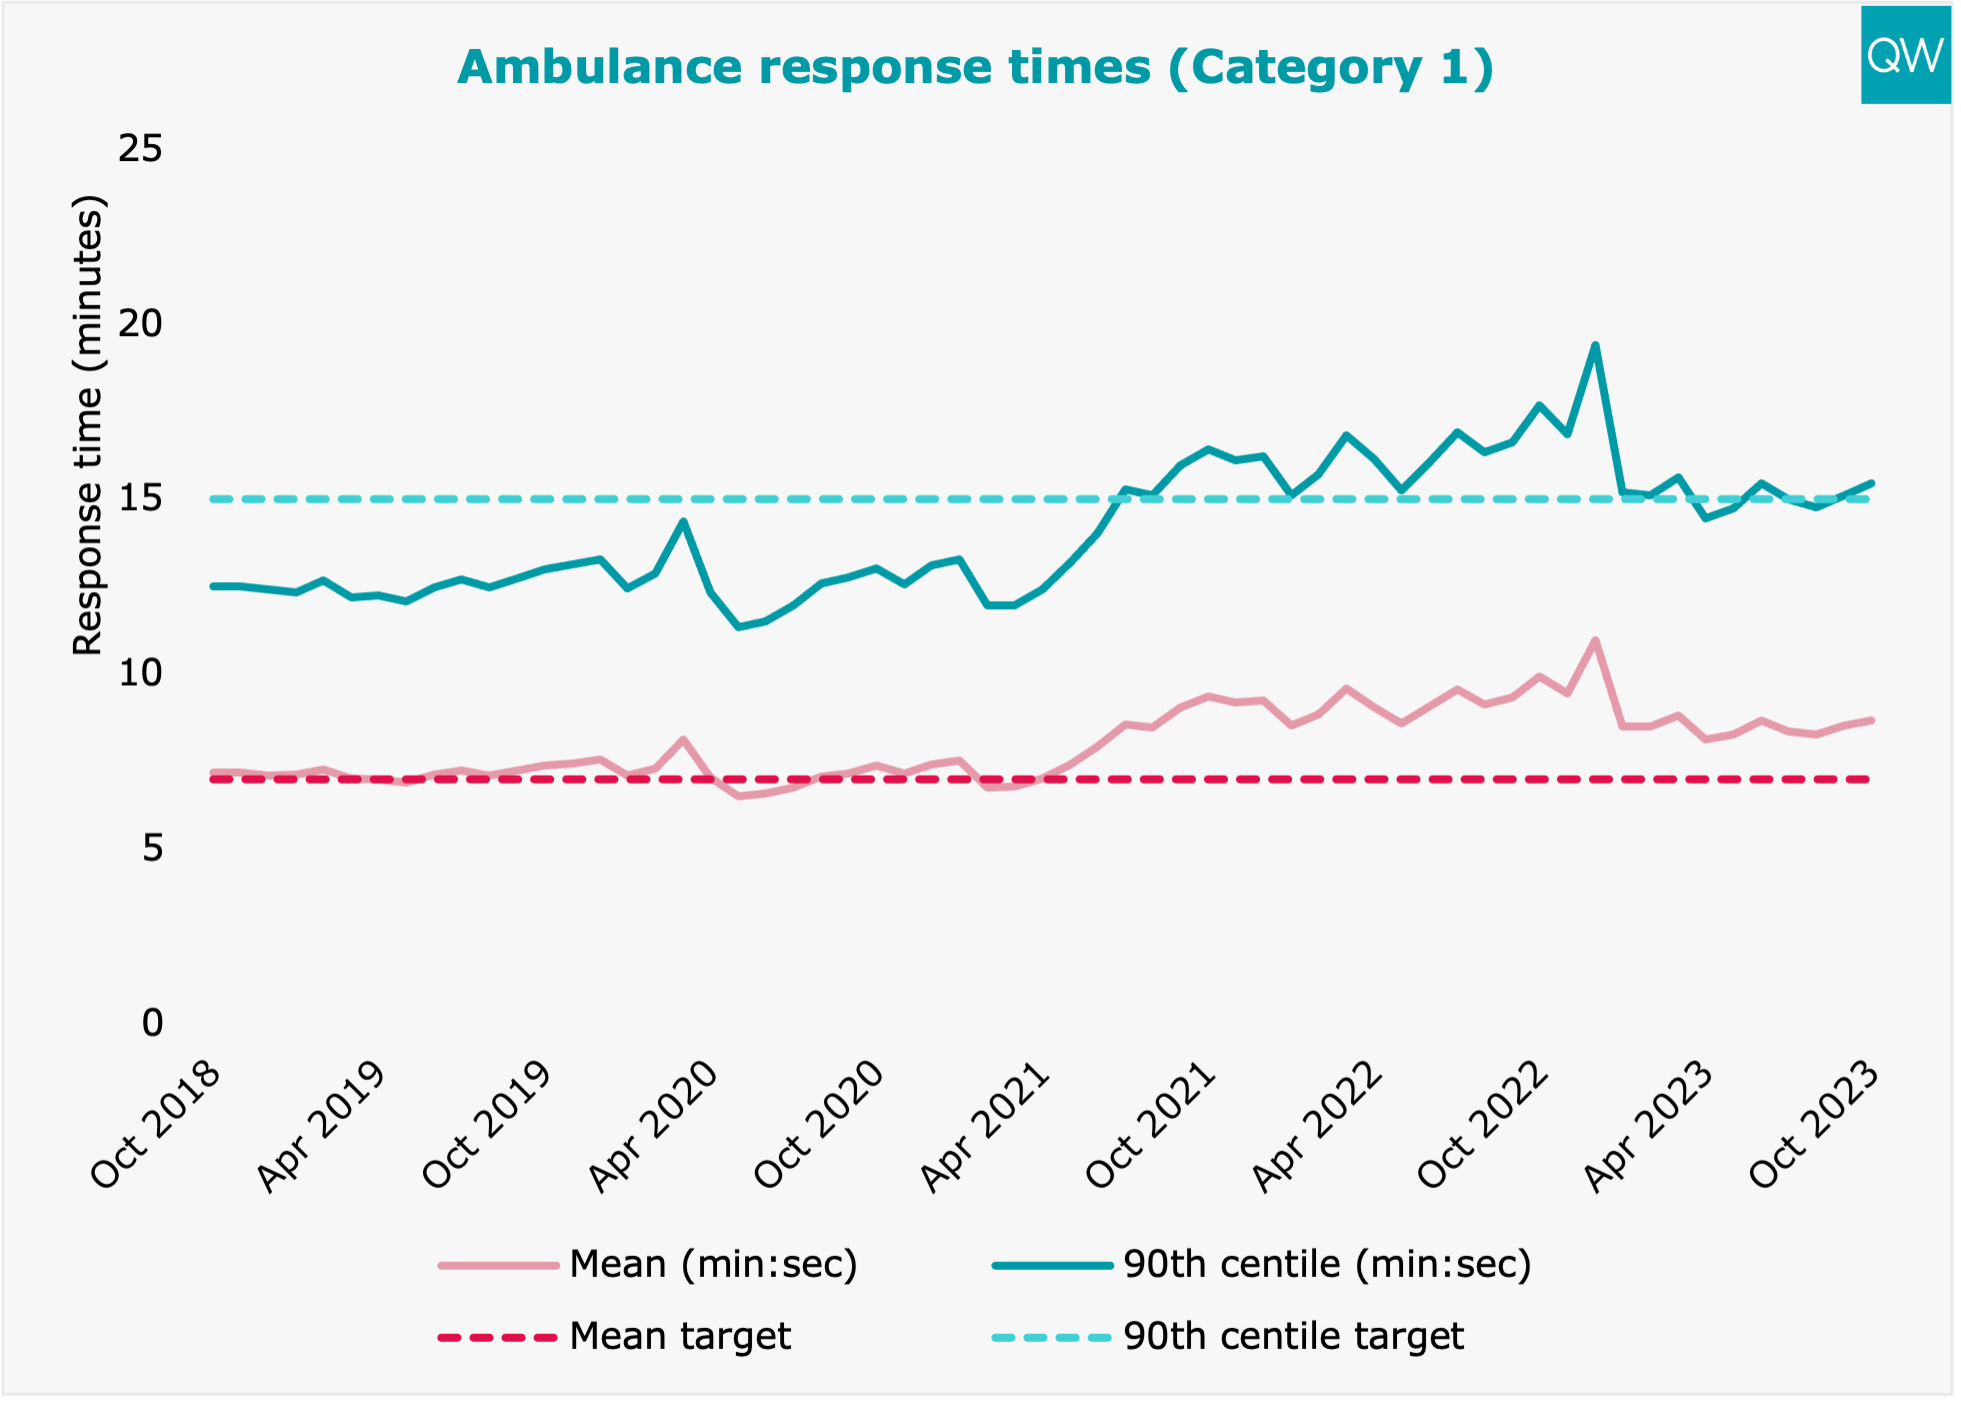 Ambulance response times are just about hitting the 90th centile target